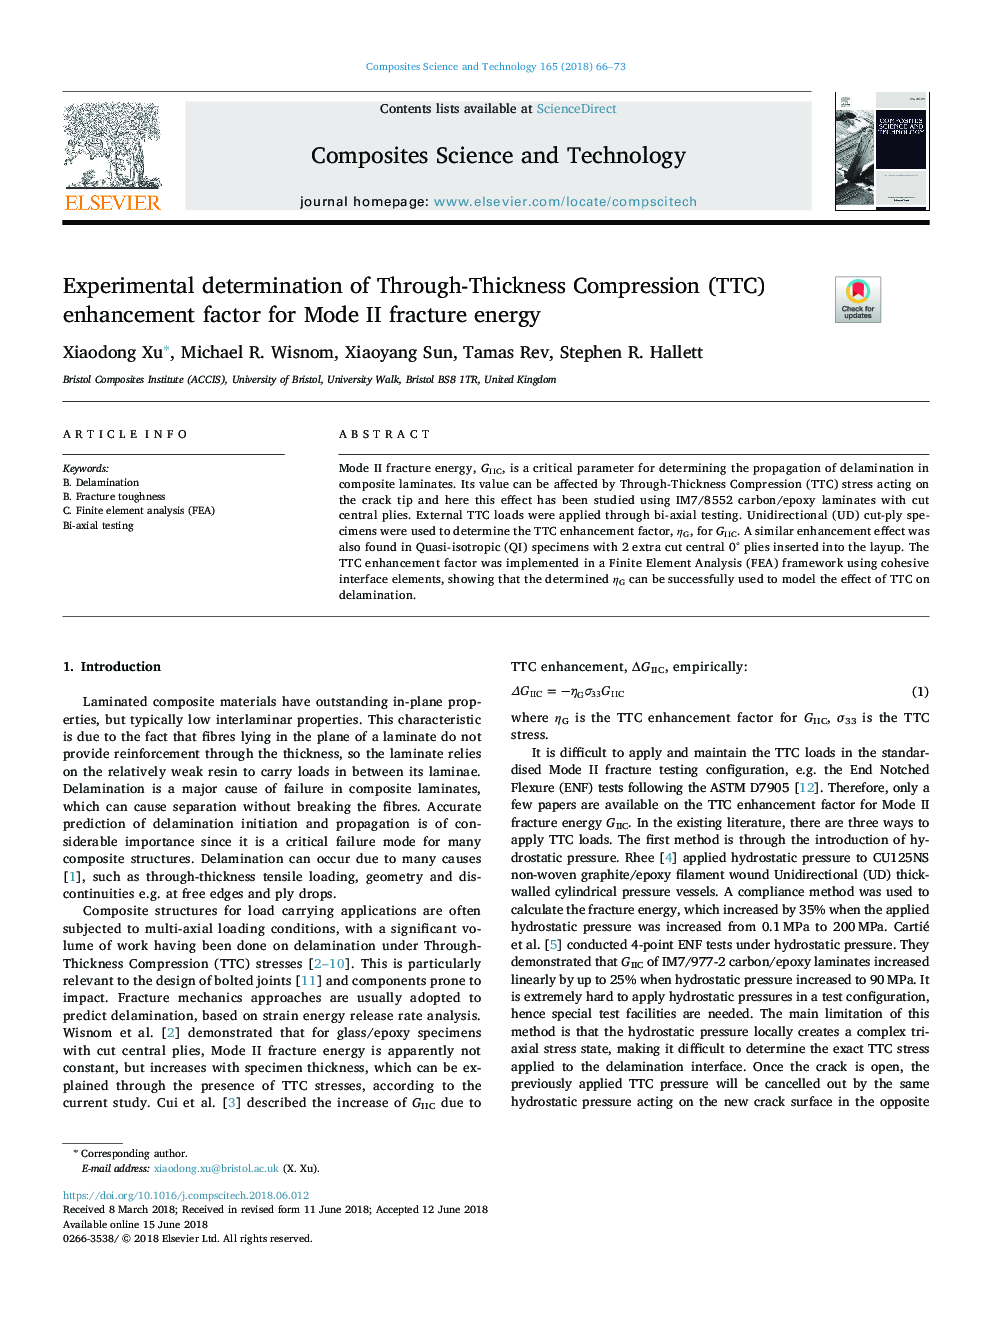 Experimental determination of Through-Thickness Compression (TTC) enhancement factor for Mode II fracture energy